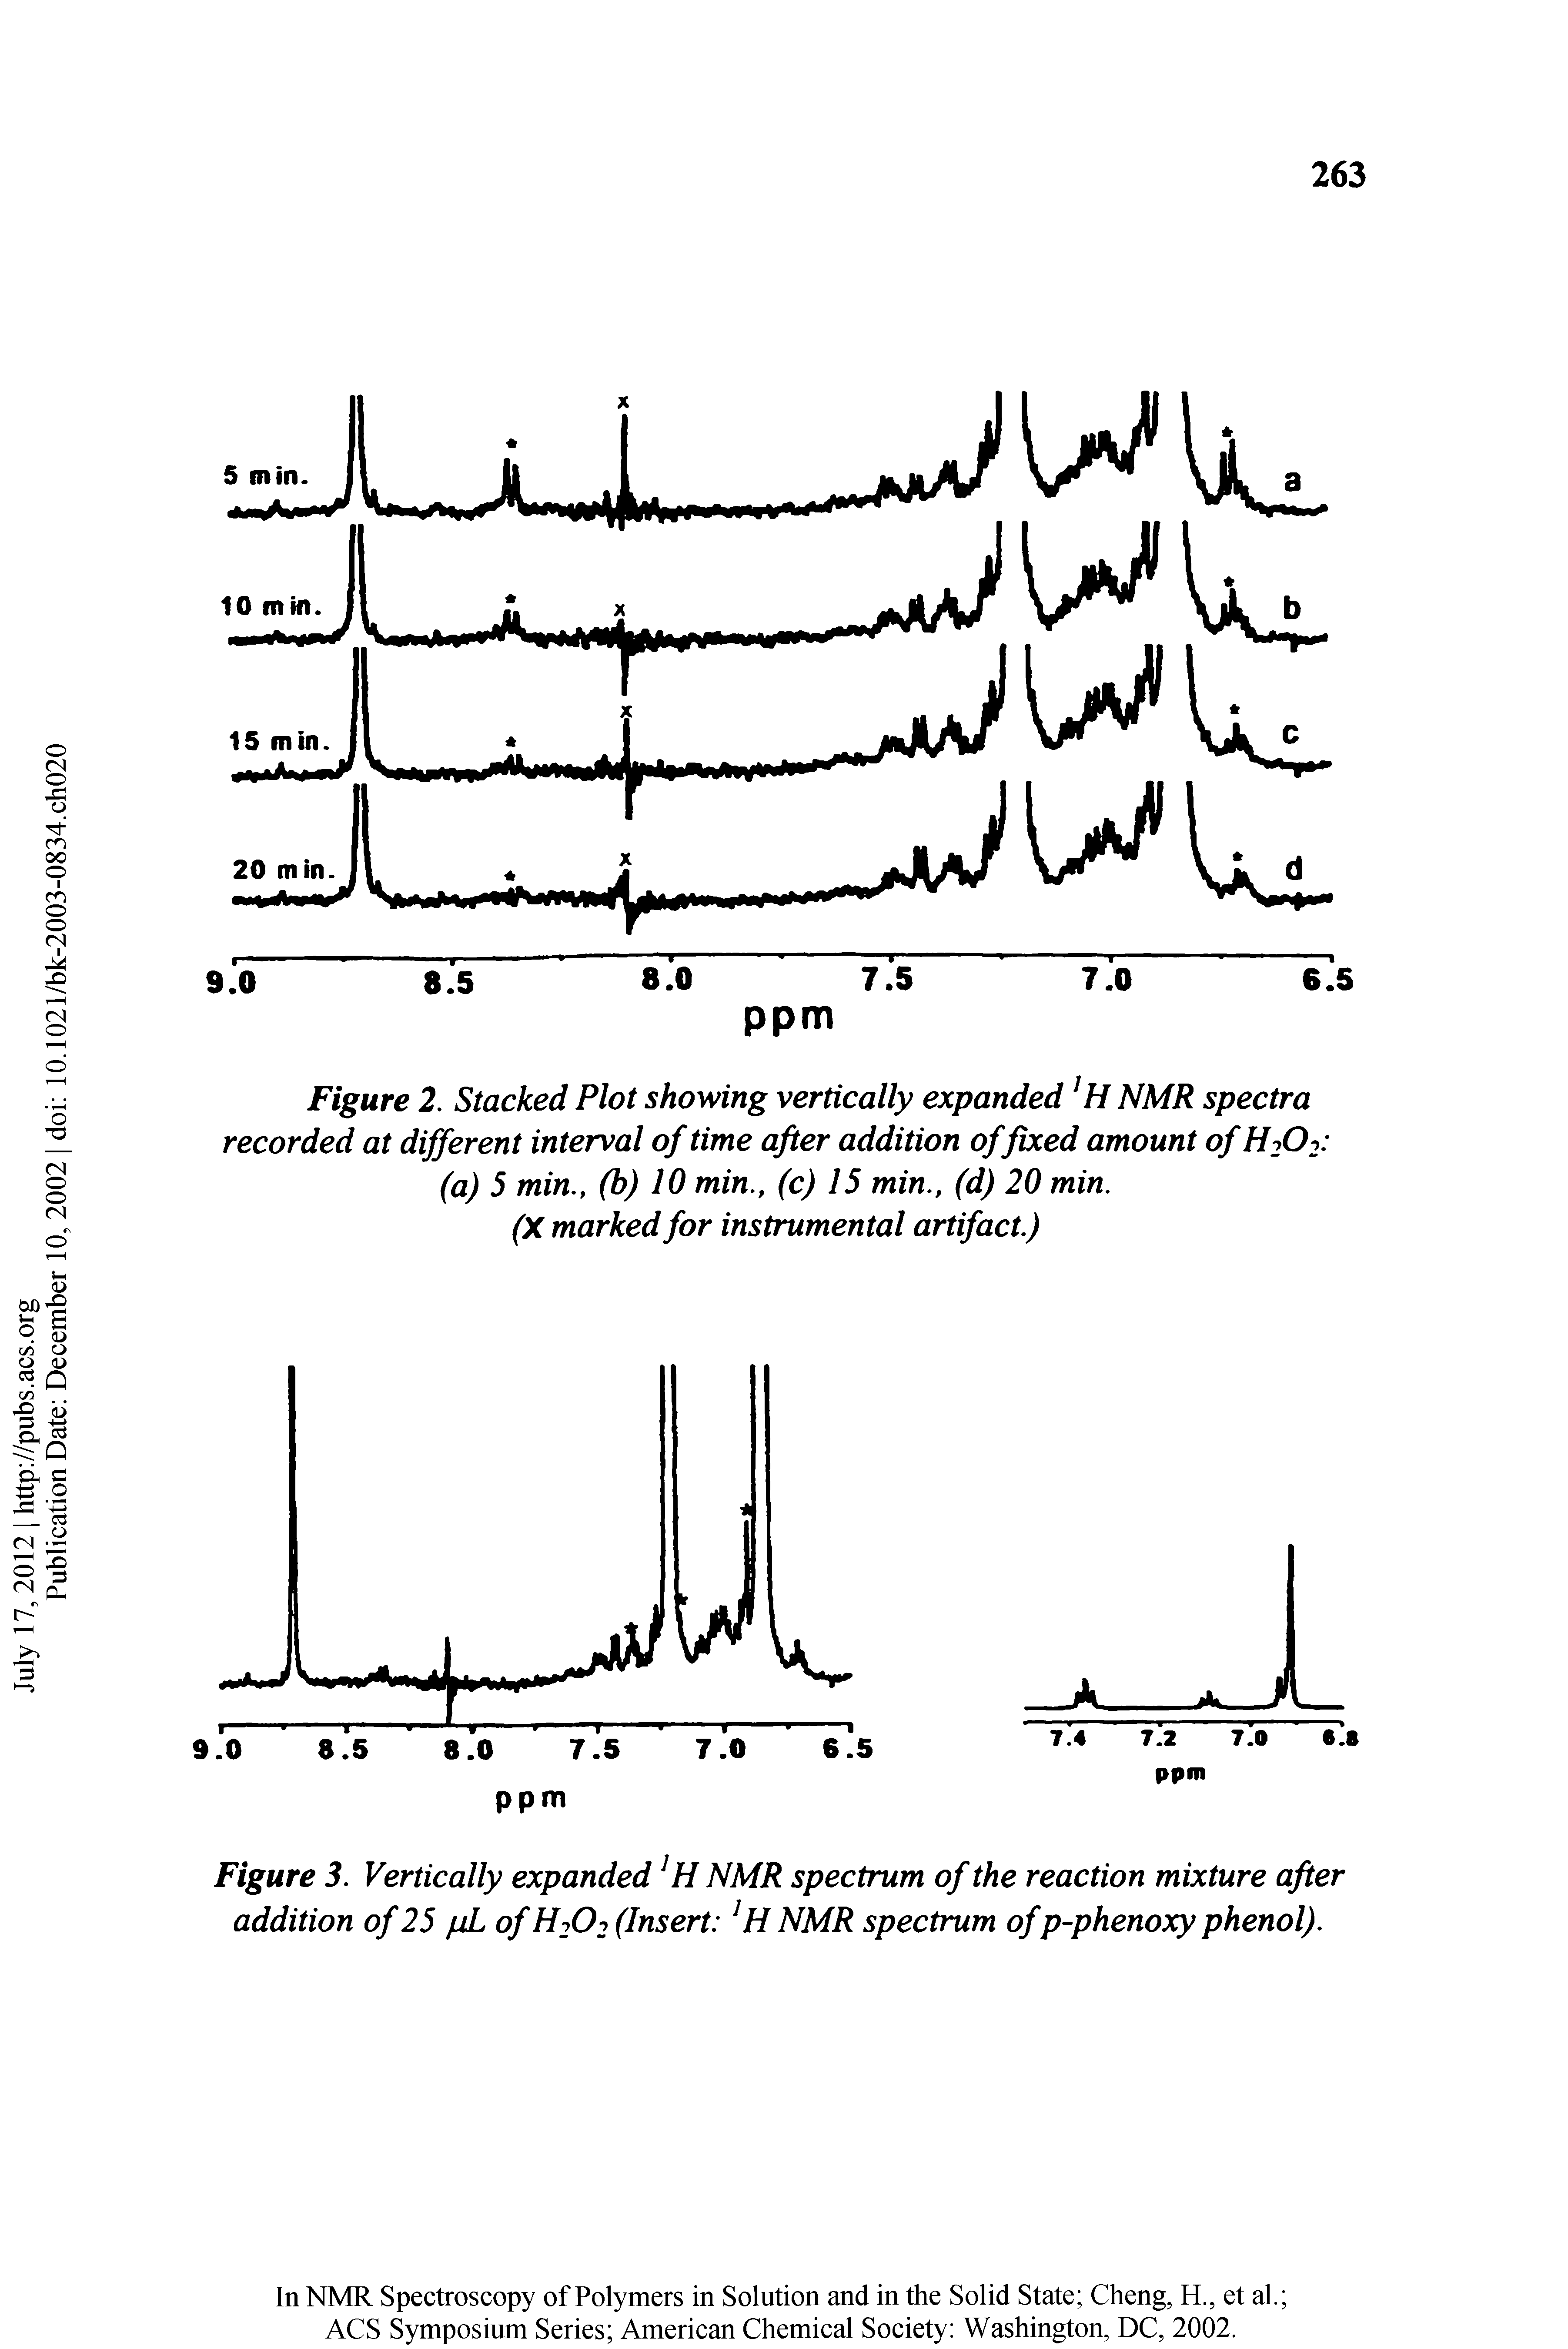 Figure 3. Vertically expanded NMR spectrum of the reaction mixture after addition of 25 pL of H1O2 (Insert NMR spectrum of p-phenoxy phenol).